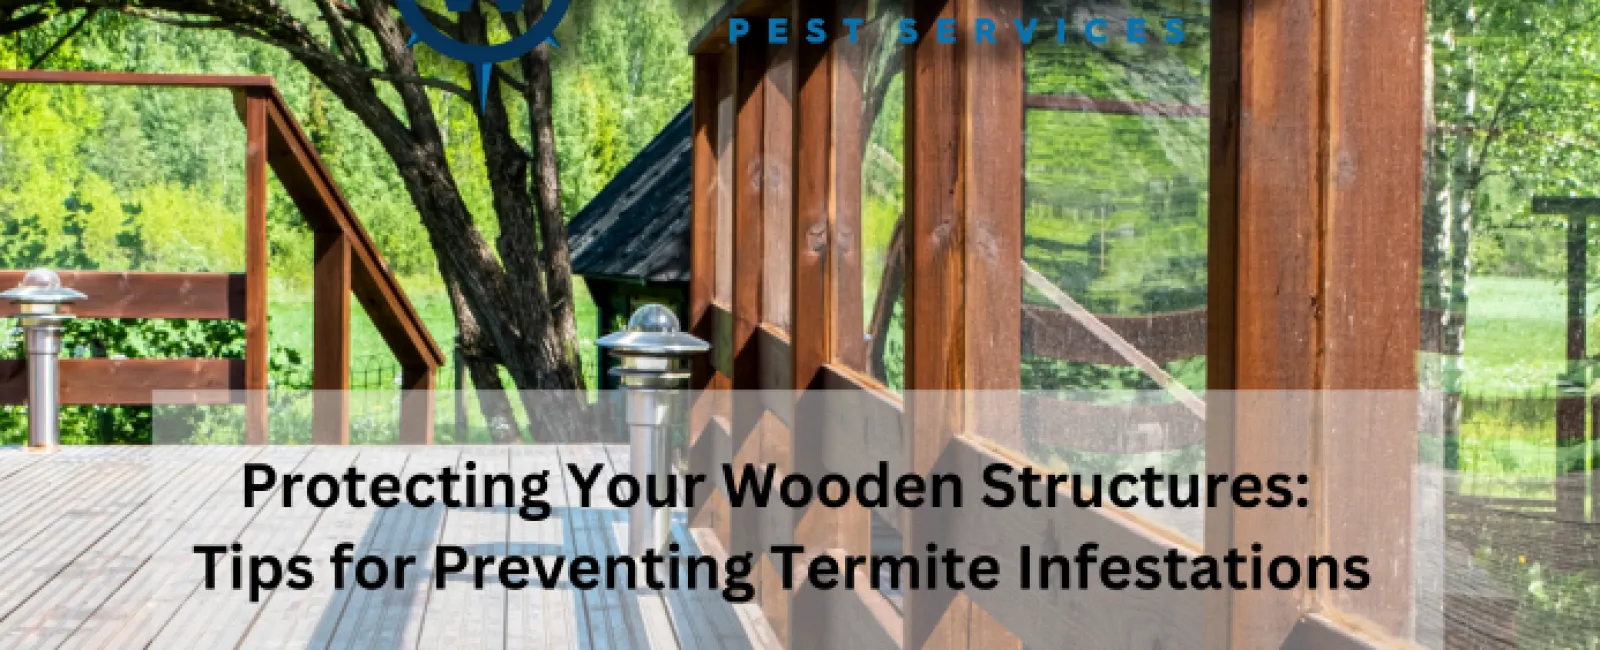 Protecting Your Wooden Structures: Tips for Preventing Termite Infestations